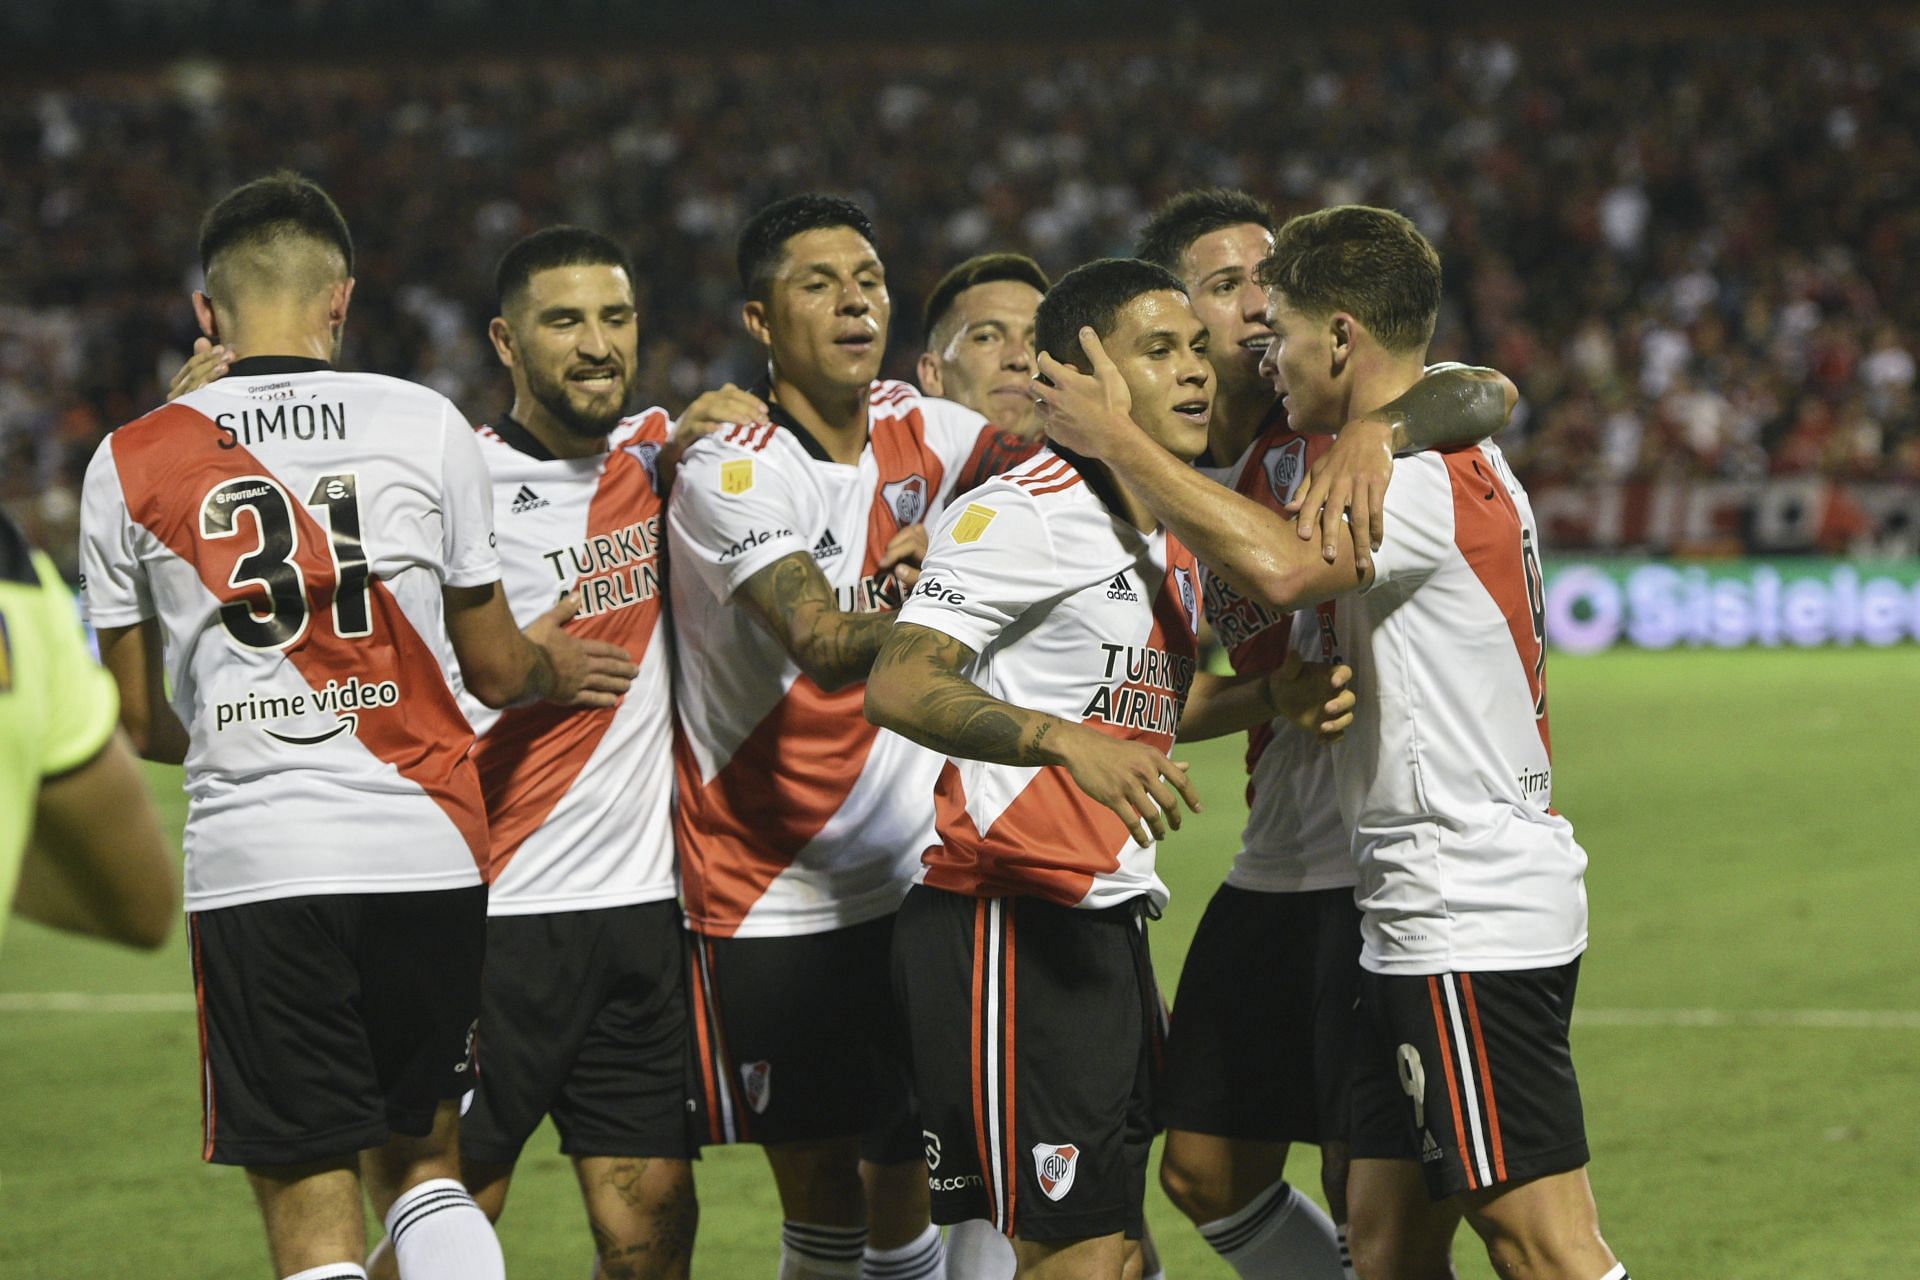 River Plate will face Alianza Lima on Wednesday